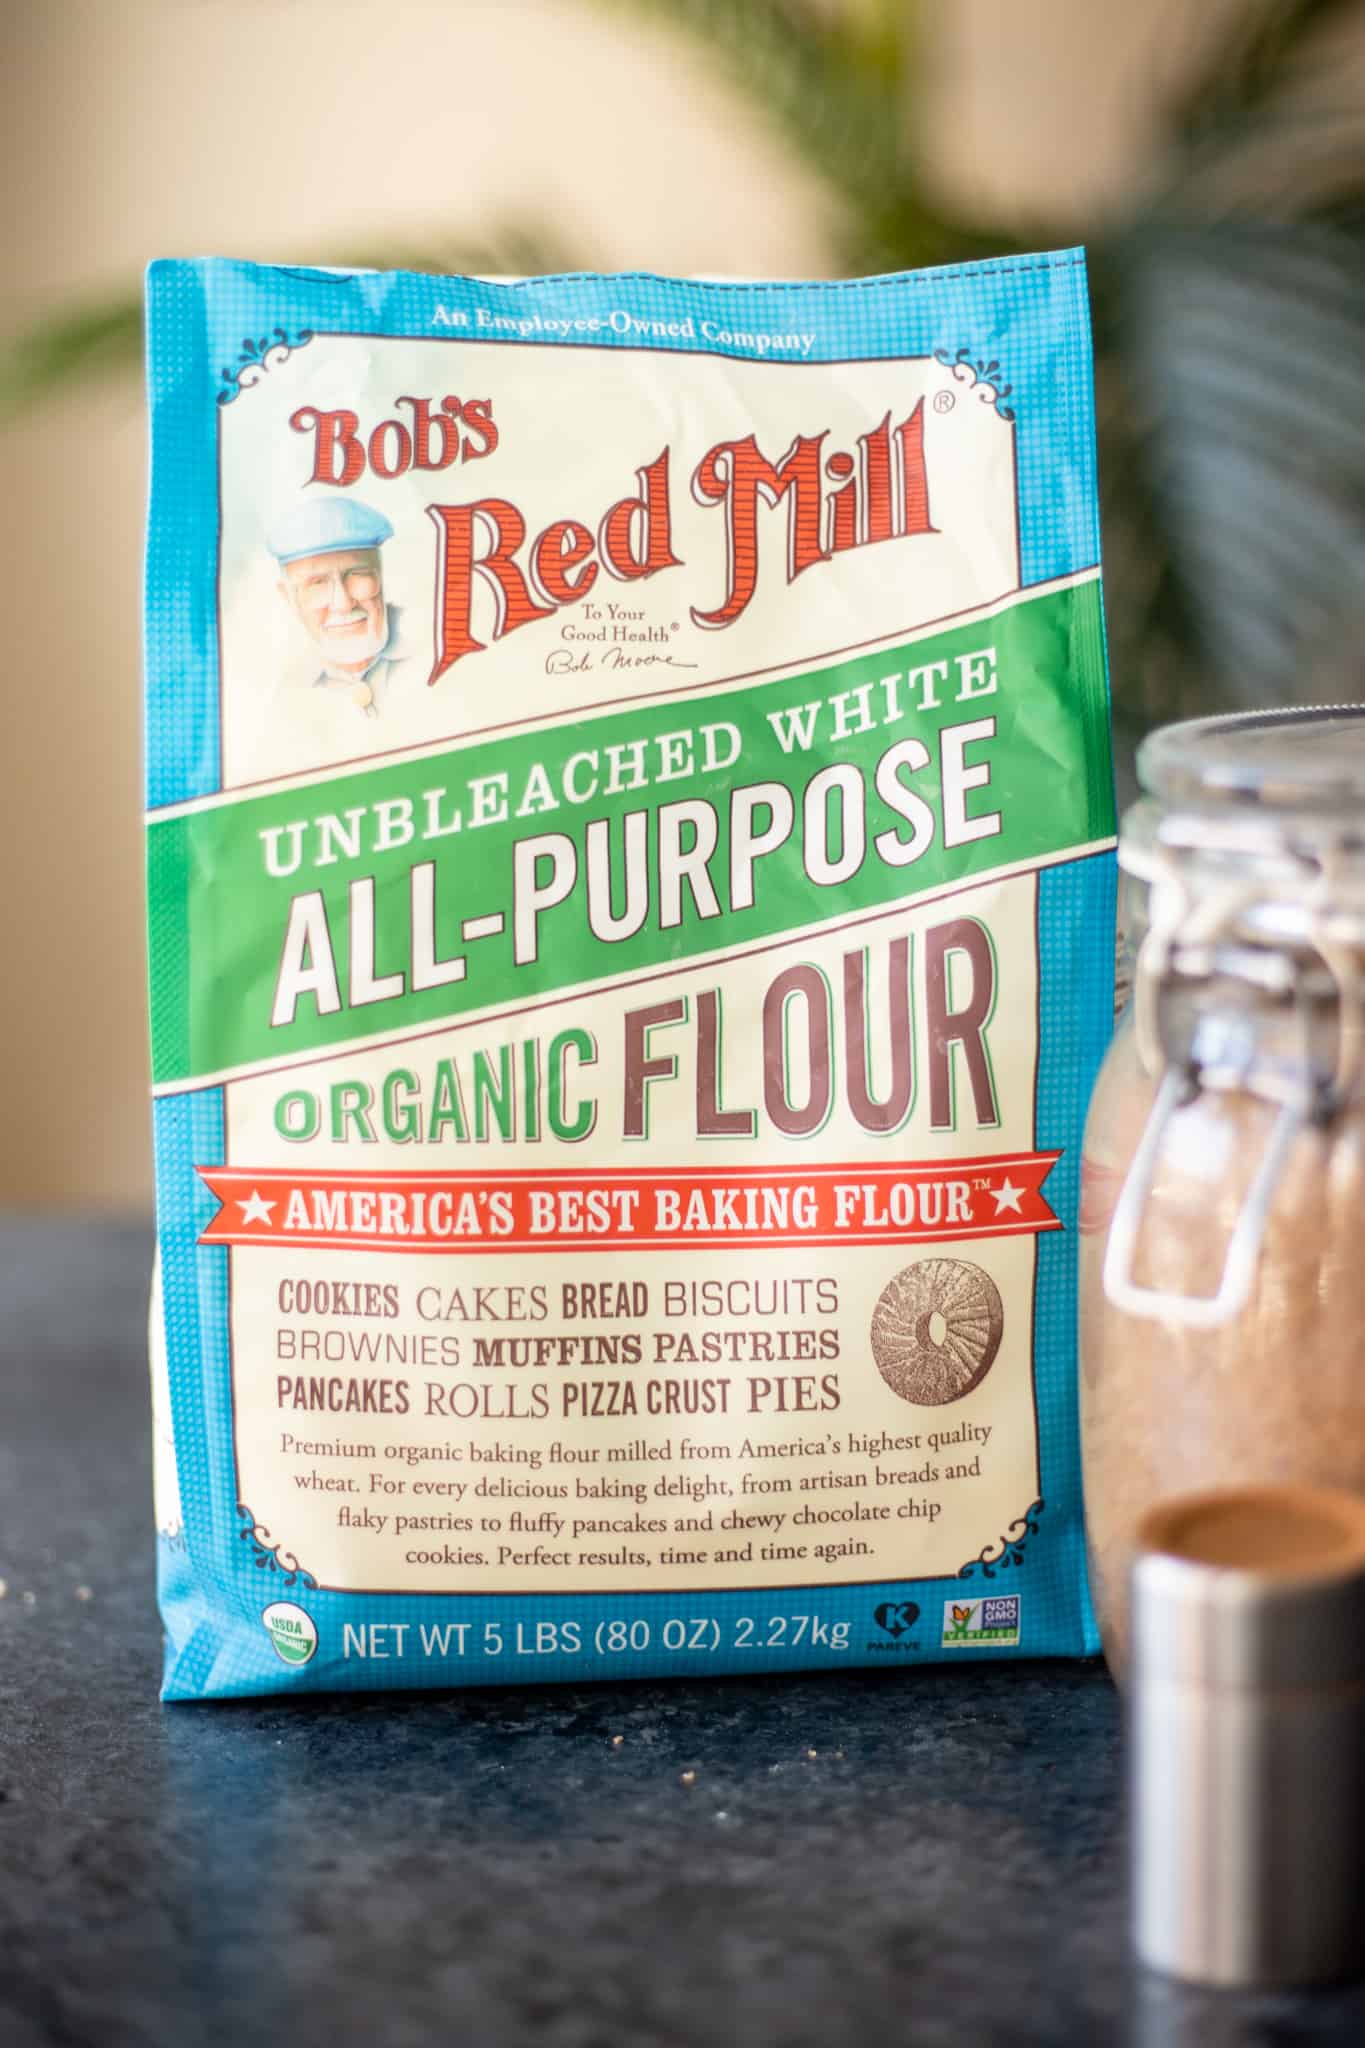 a bag of Bob's Red Mill's Organic All-Purpose Flour with some cinnamon and brown sugar